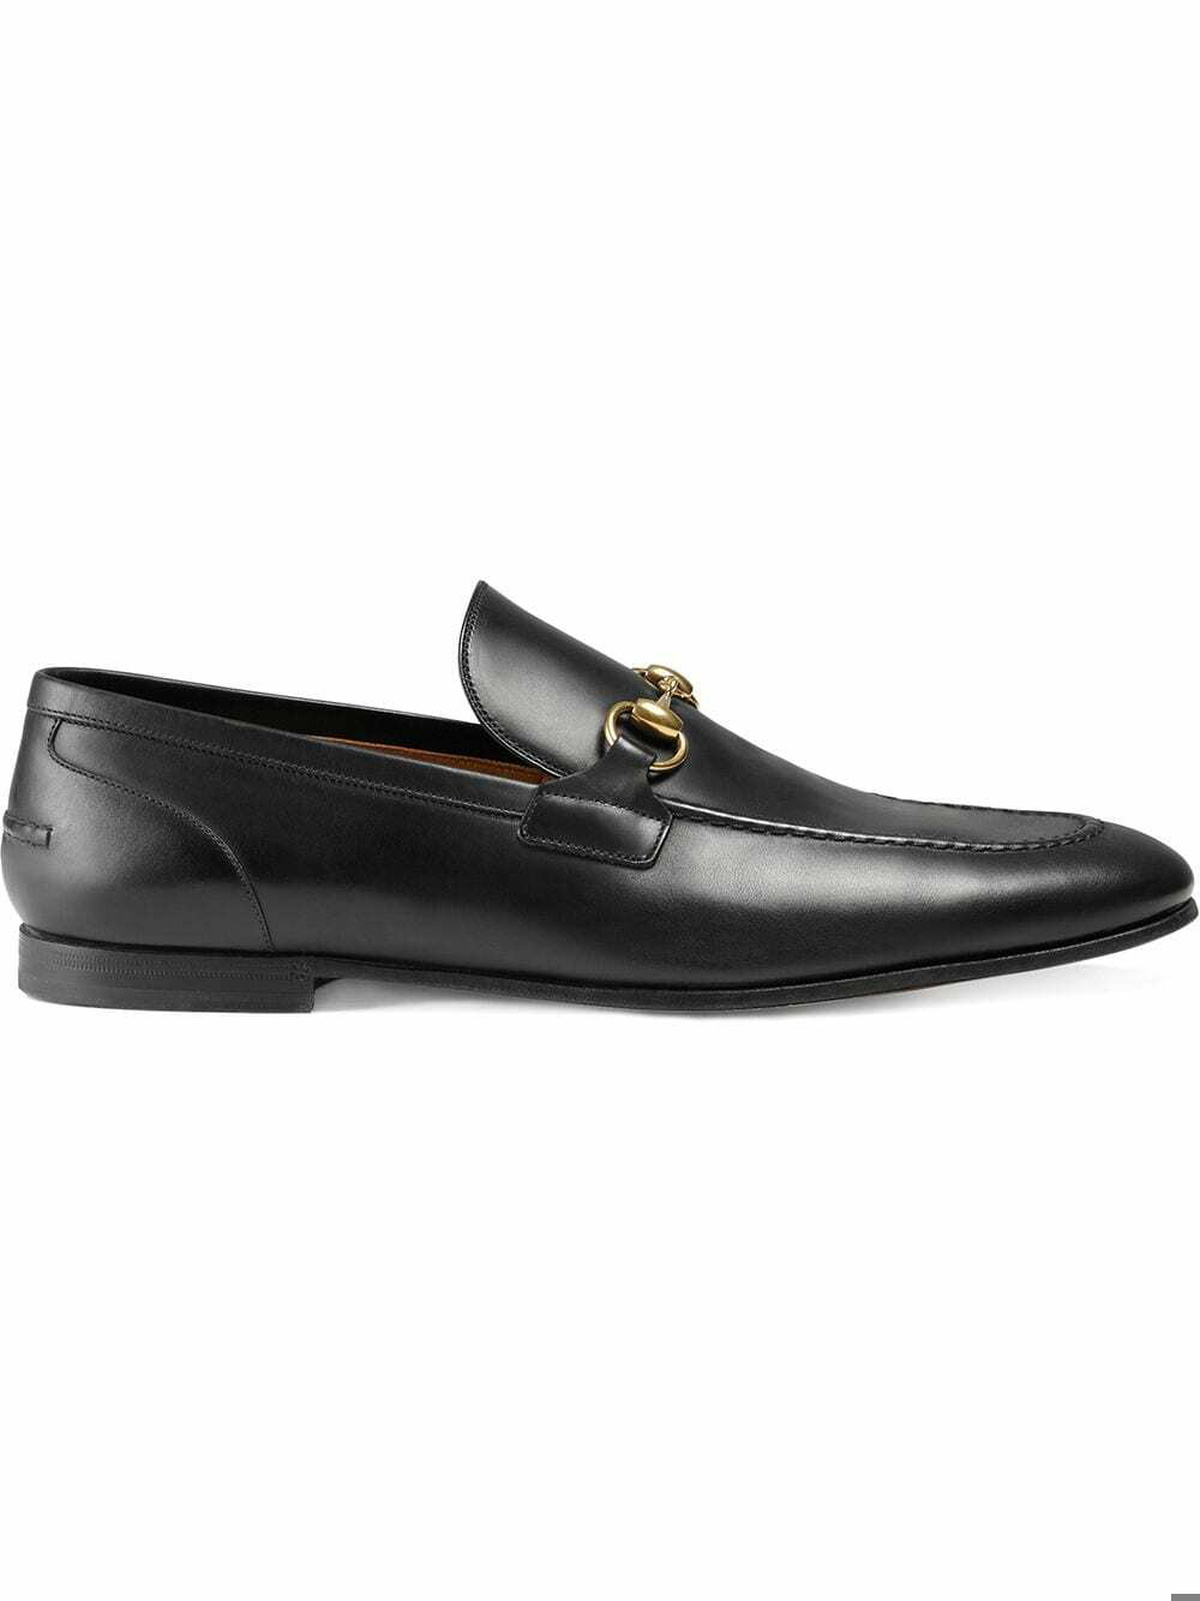 GUCCI - Jordan Leather Loafers Gucci